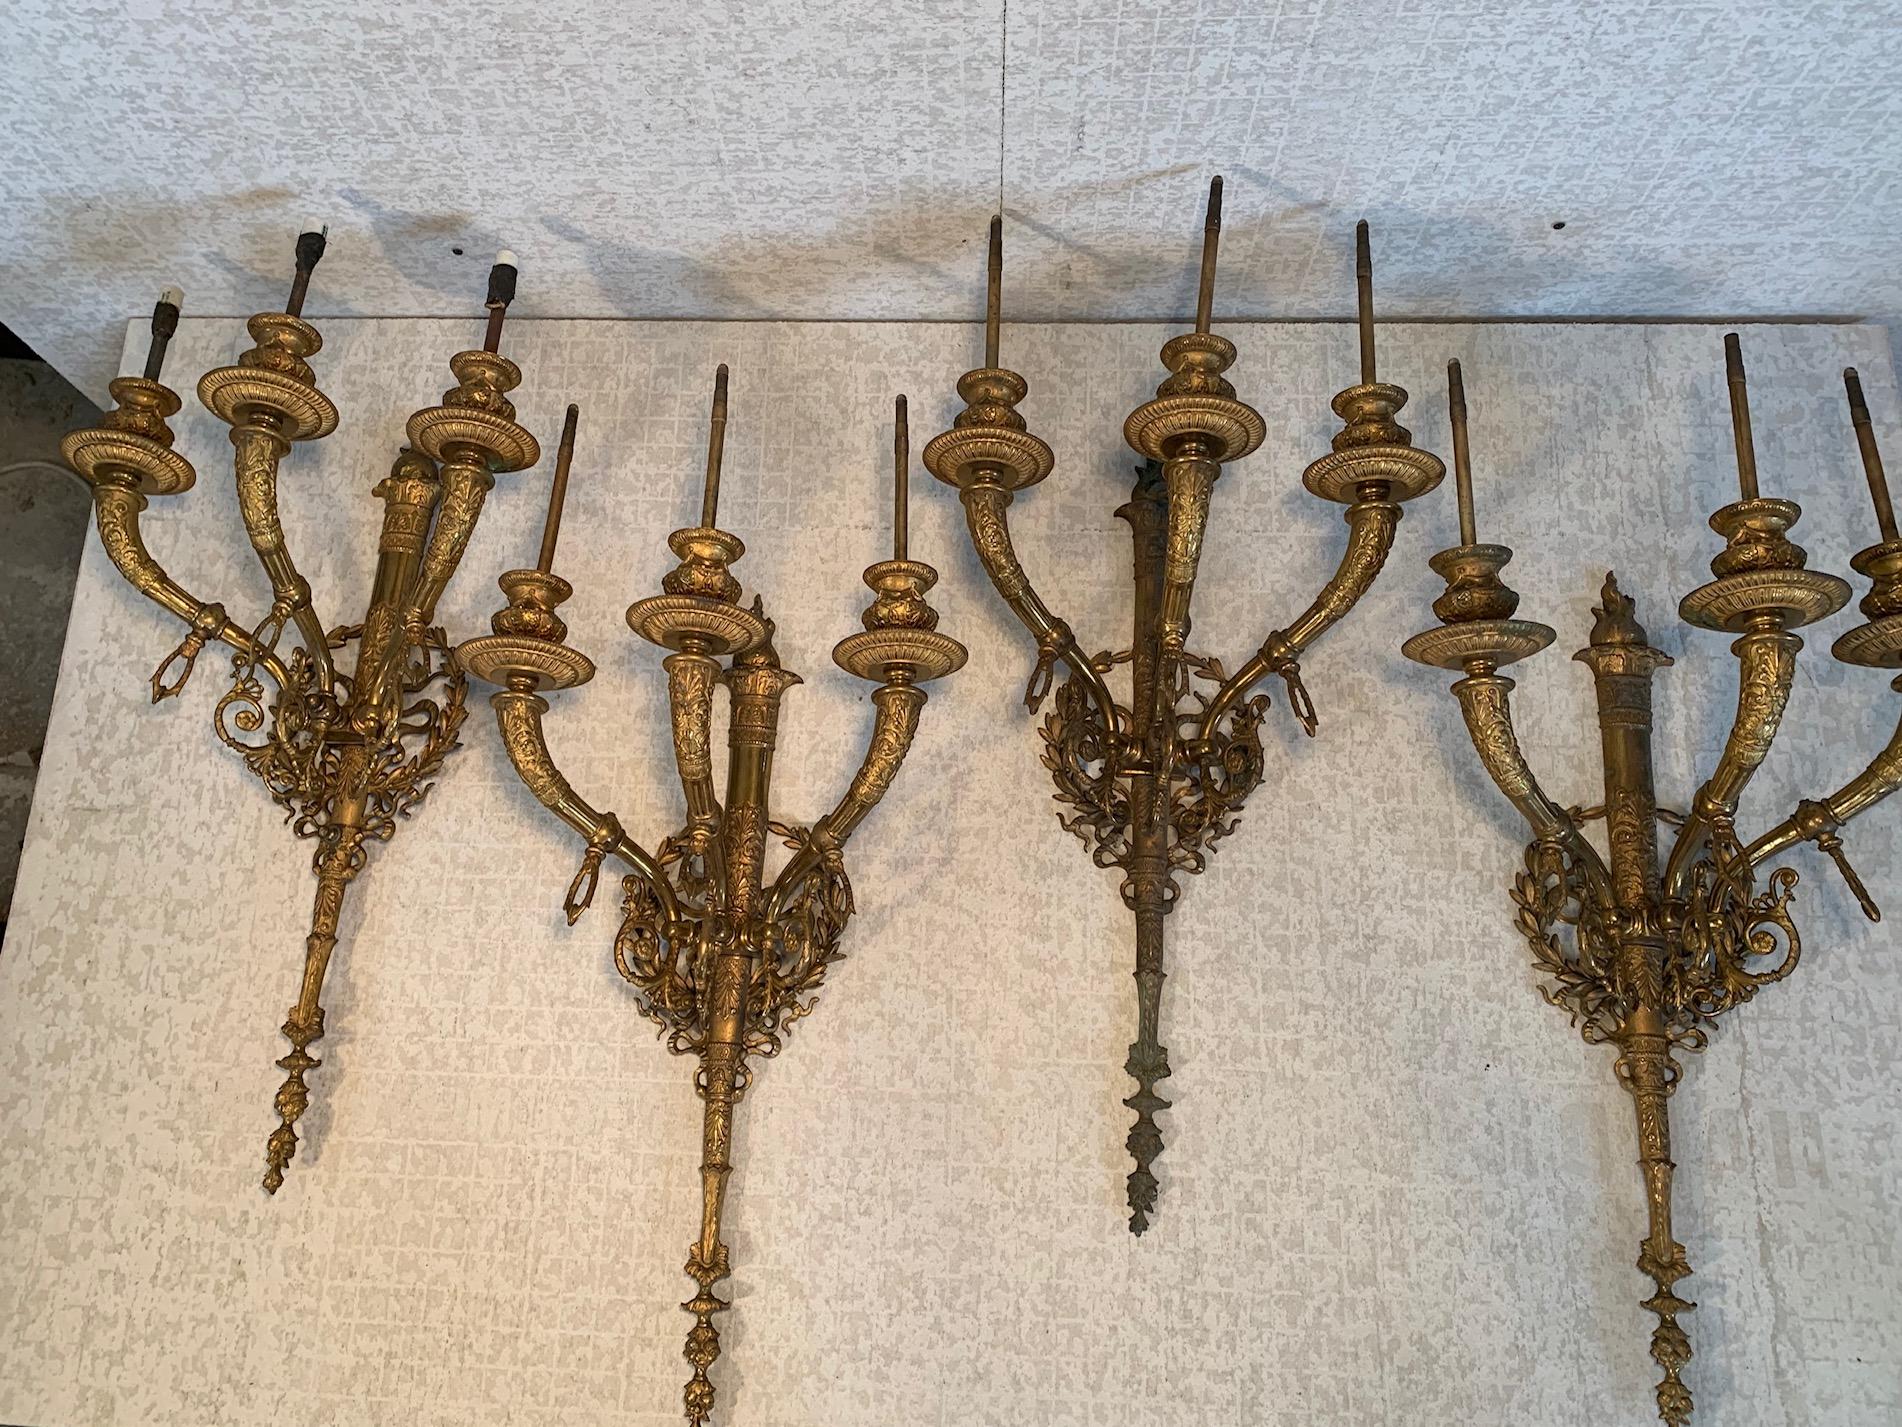 Two, exceptional pairs of 19th century 3-arm gas sconces featuring Horn-shaped arms ornamented with anthemions and terminating in urn form candle cups with swags. Sconce body depicts torchier wreathes with pierced olive branches and ribbons.